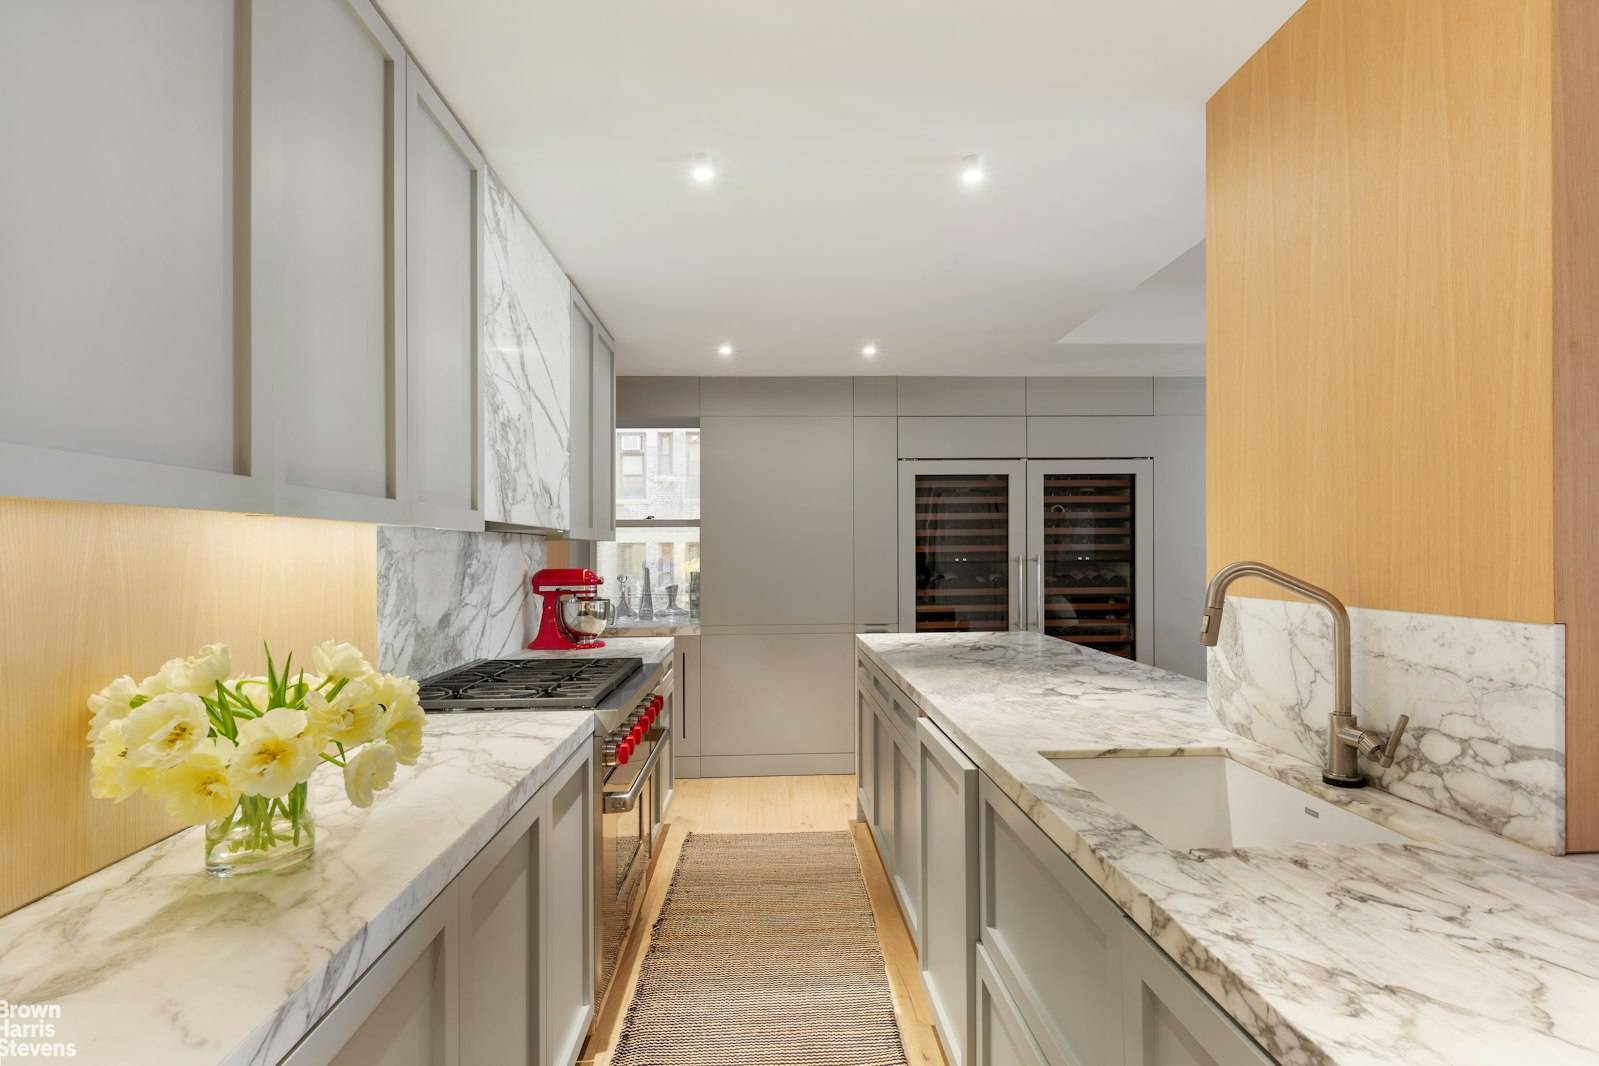 Next to Riverside Park and recently gut renovated by Stewart Schafer Architects and featured in Dwell magazine, this expansive turnkey 3 bedroom, 2.